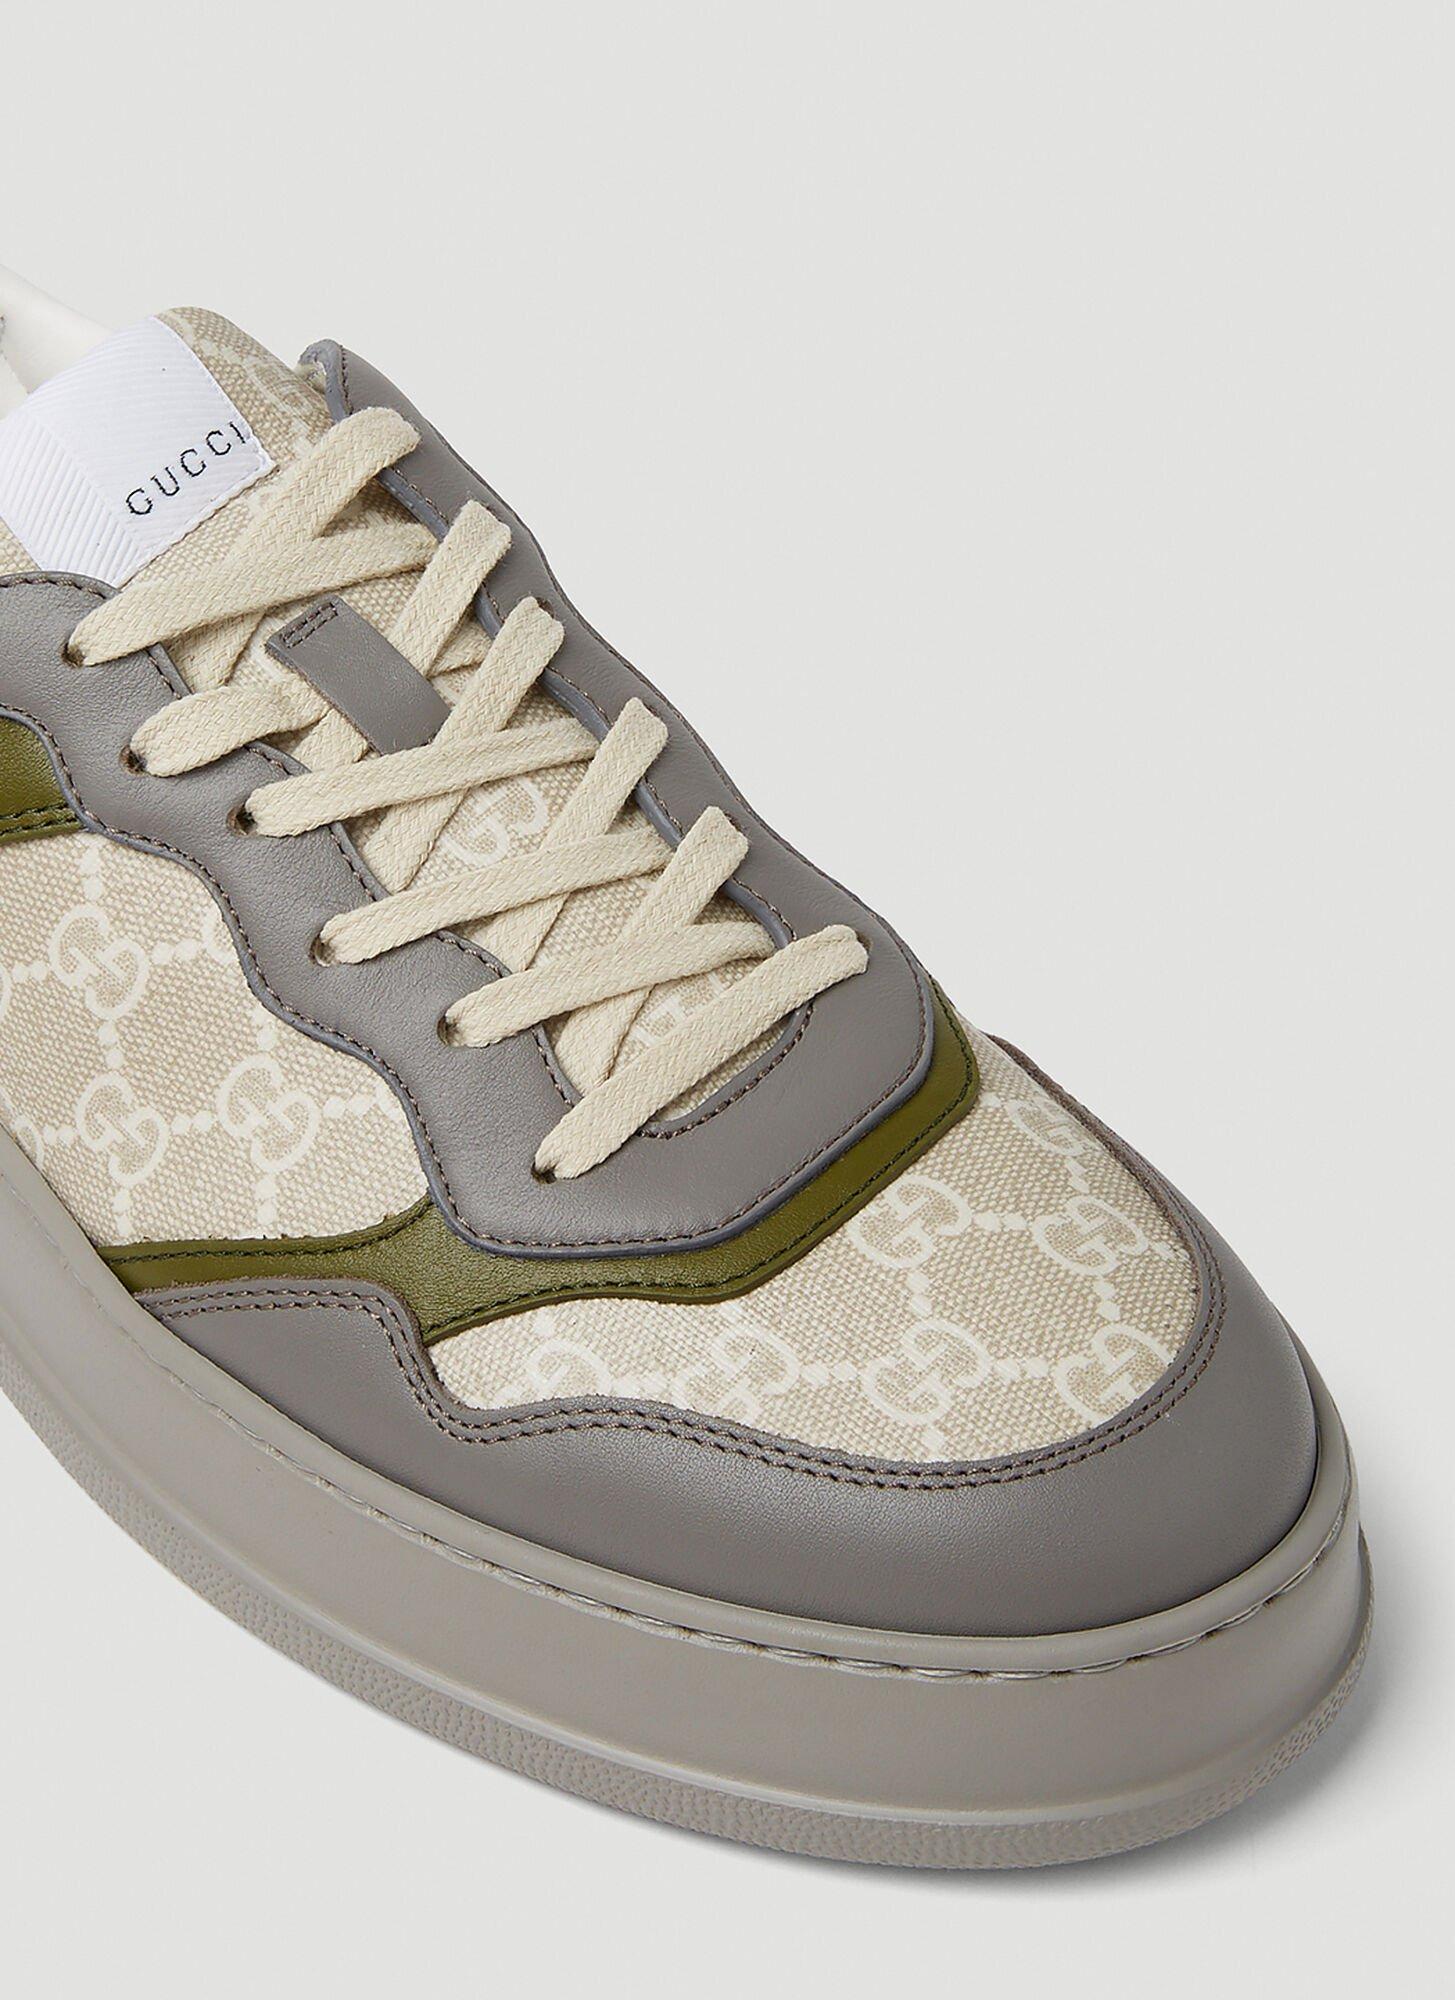 Gucci Basket Low Sneakers in Gray for Men | Lyst